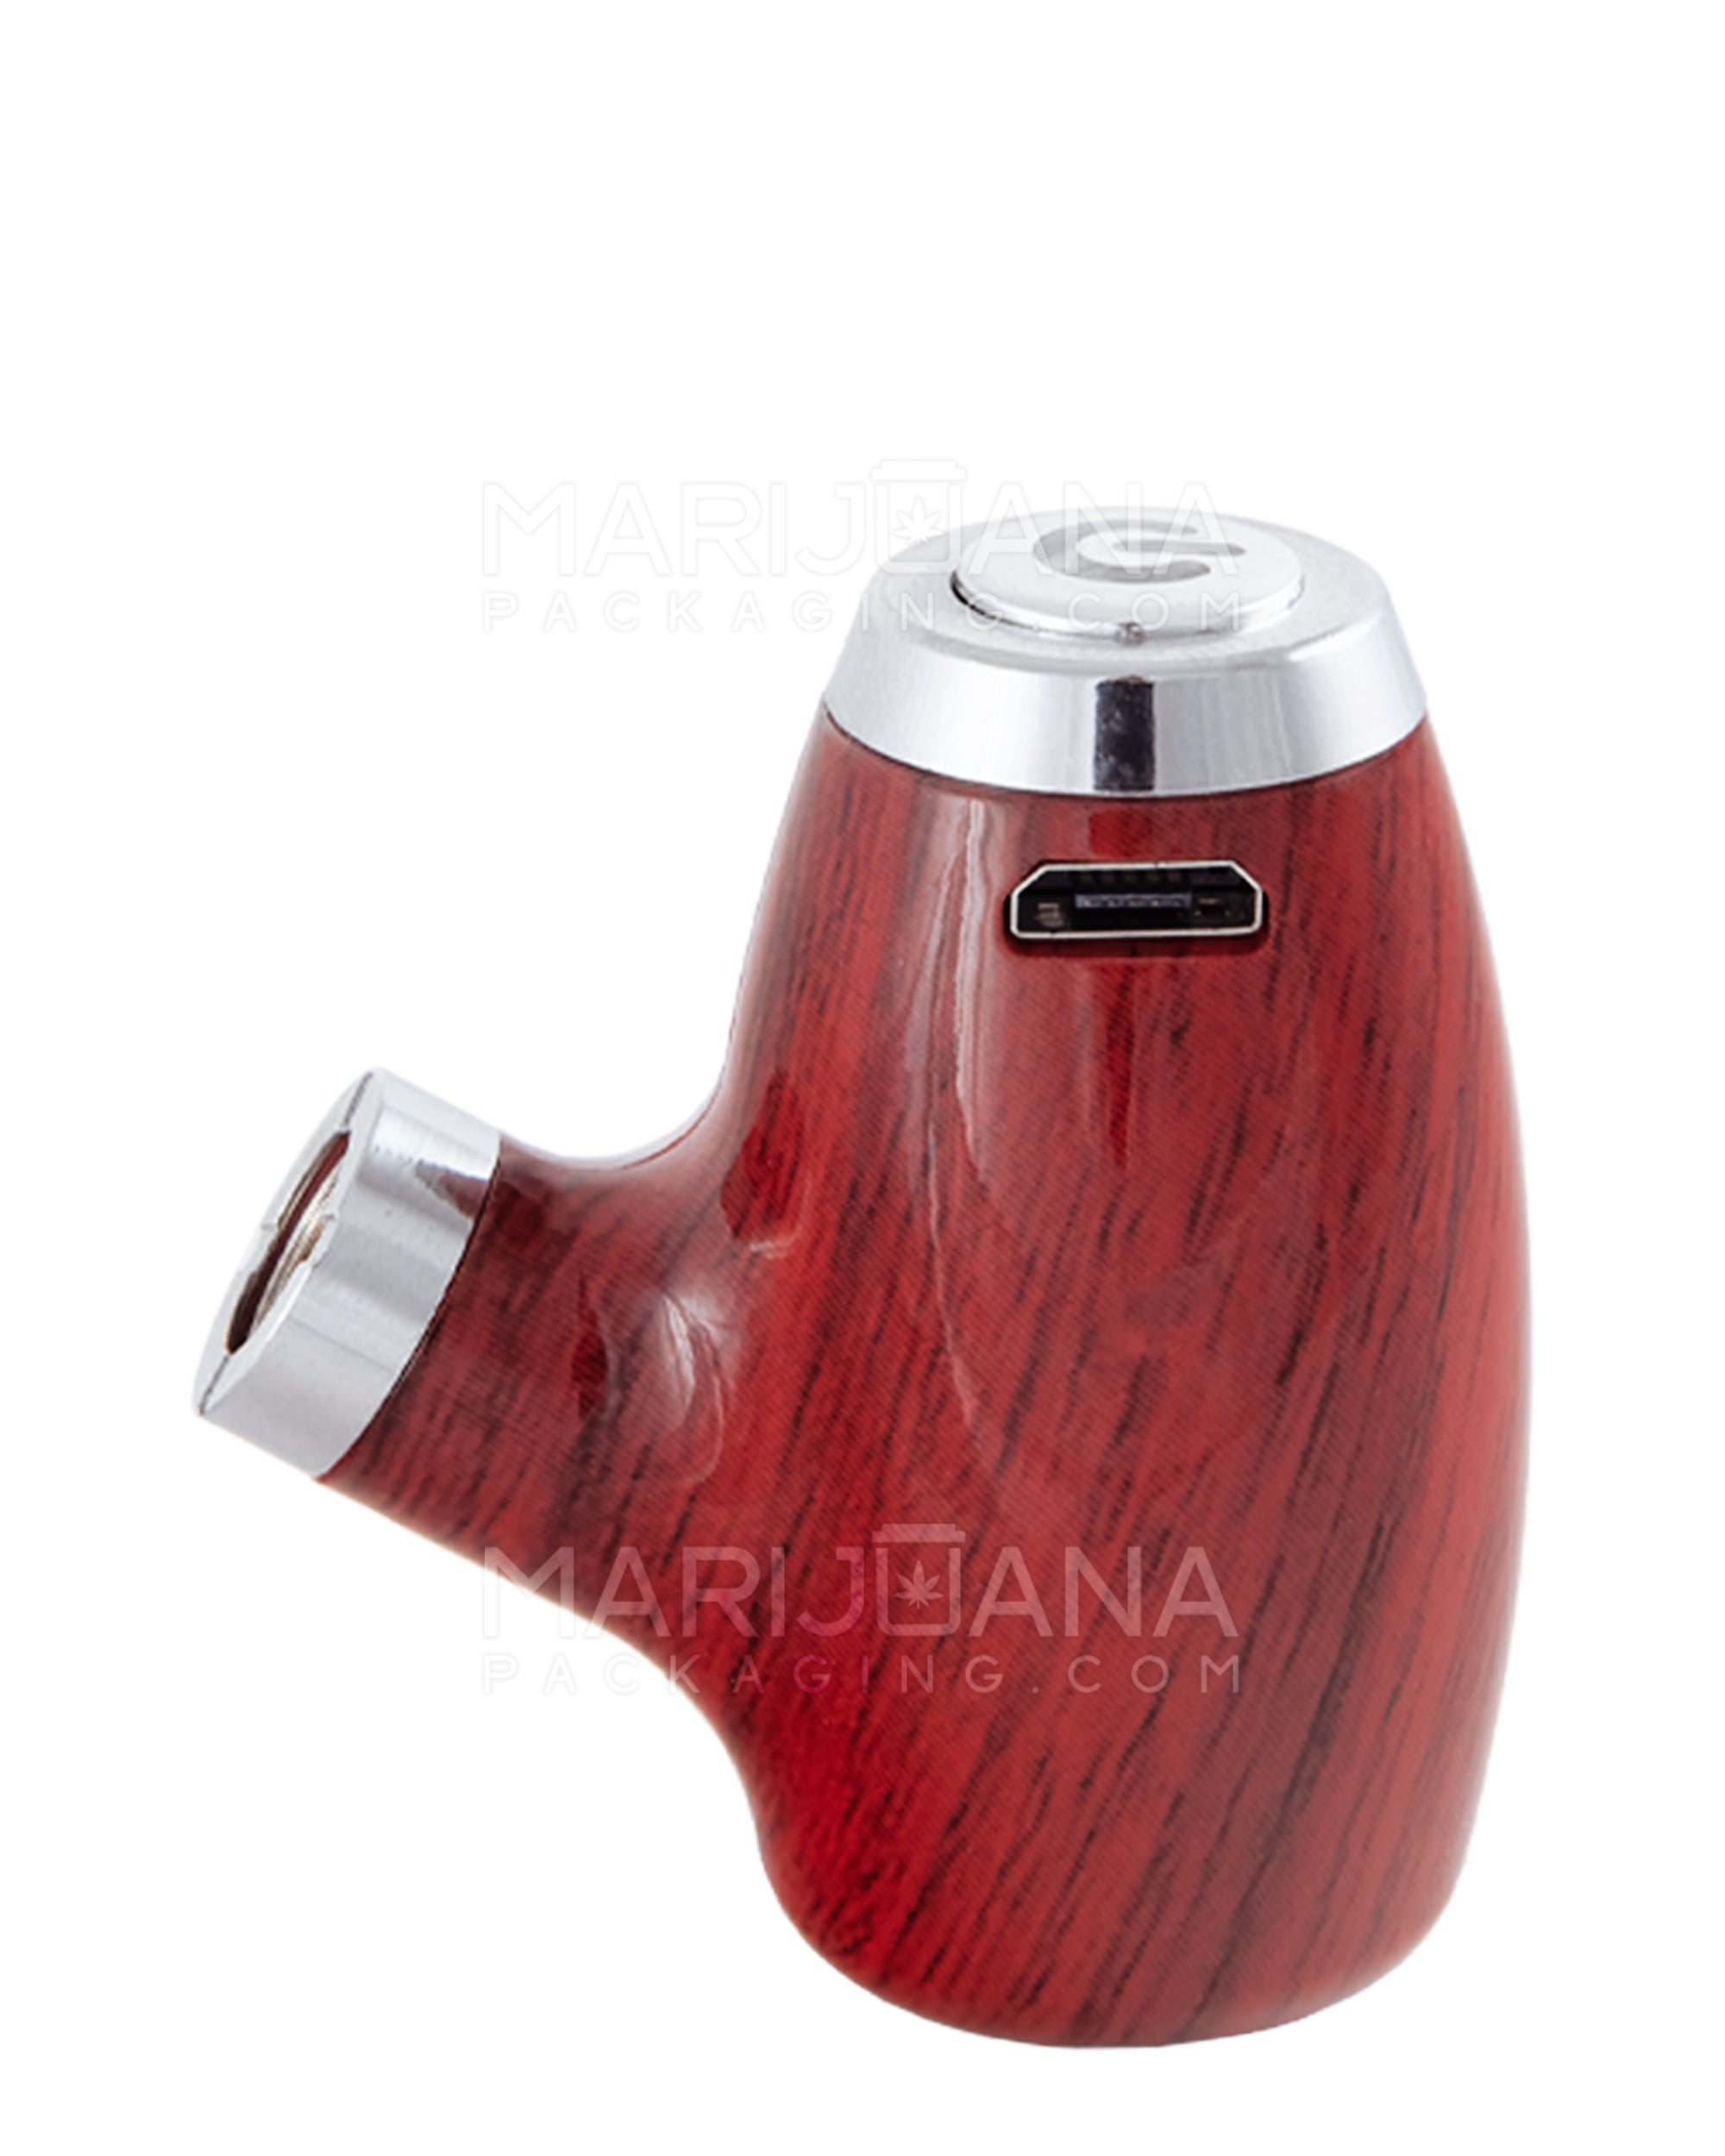 Variable Voltage "Old Man's Pipe" Shaped Vape Cartridge Battery | 900mah - Redwood Wood - 510 Thread - 7